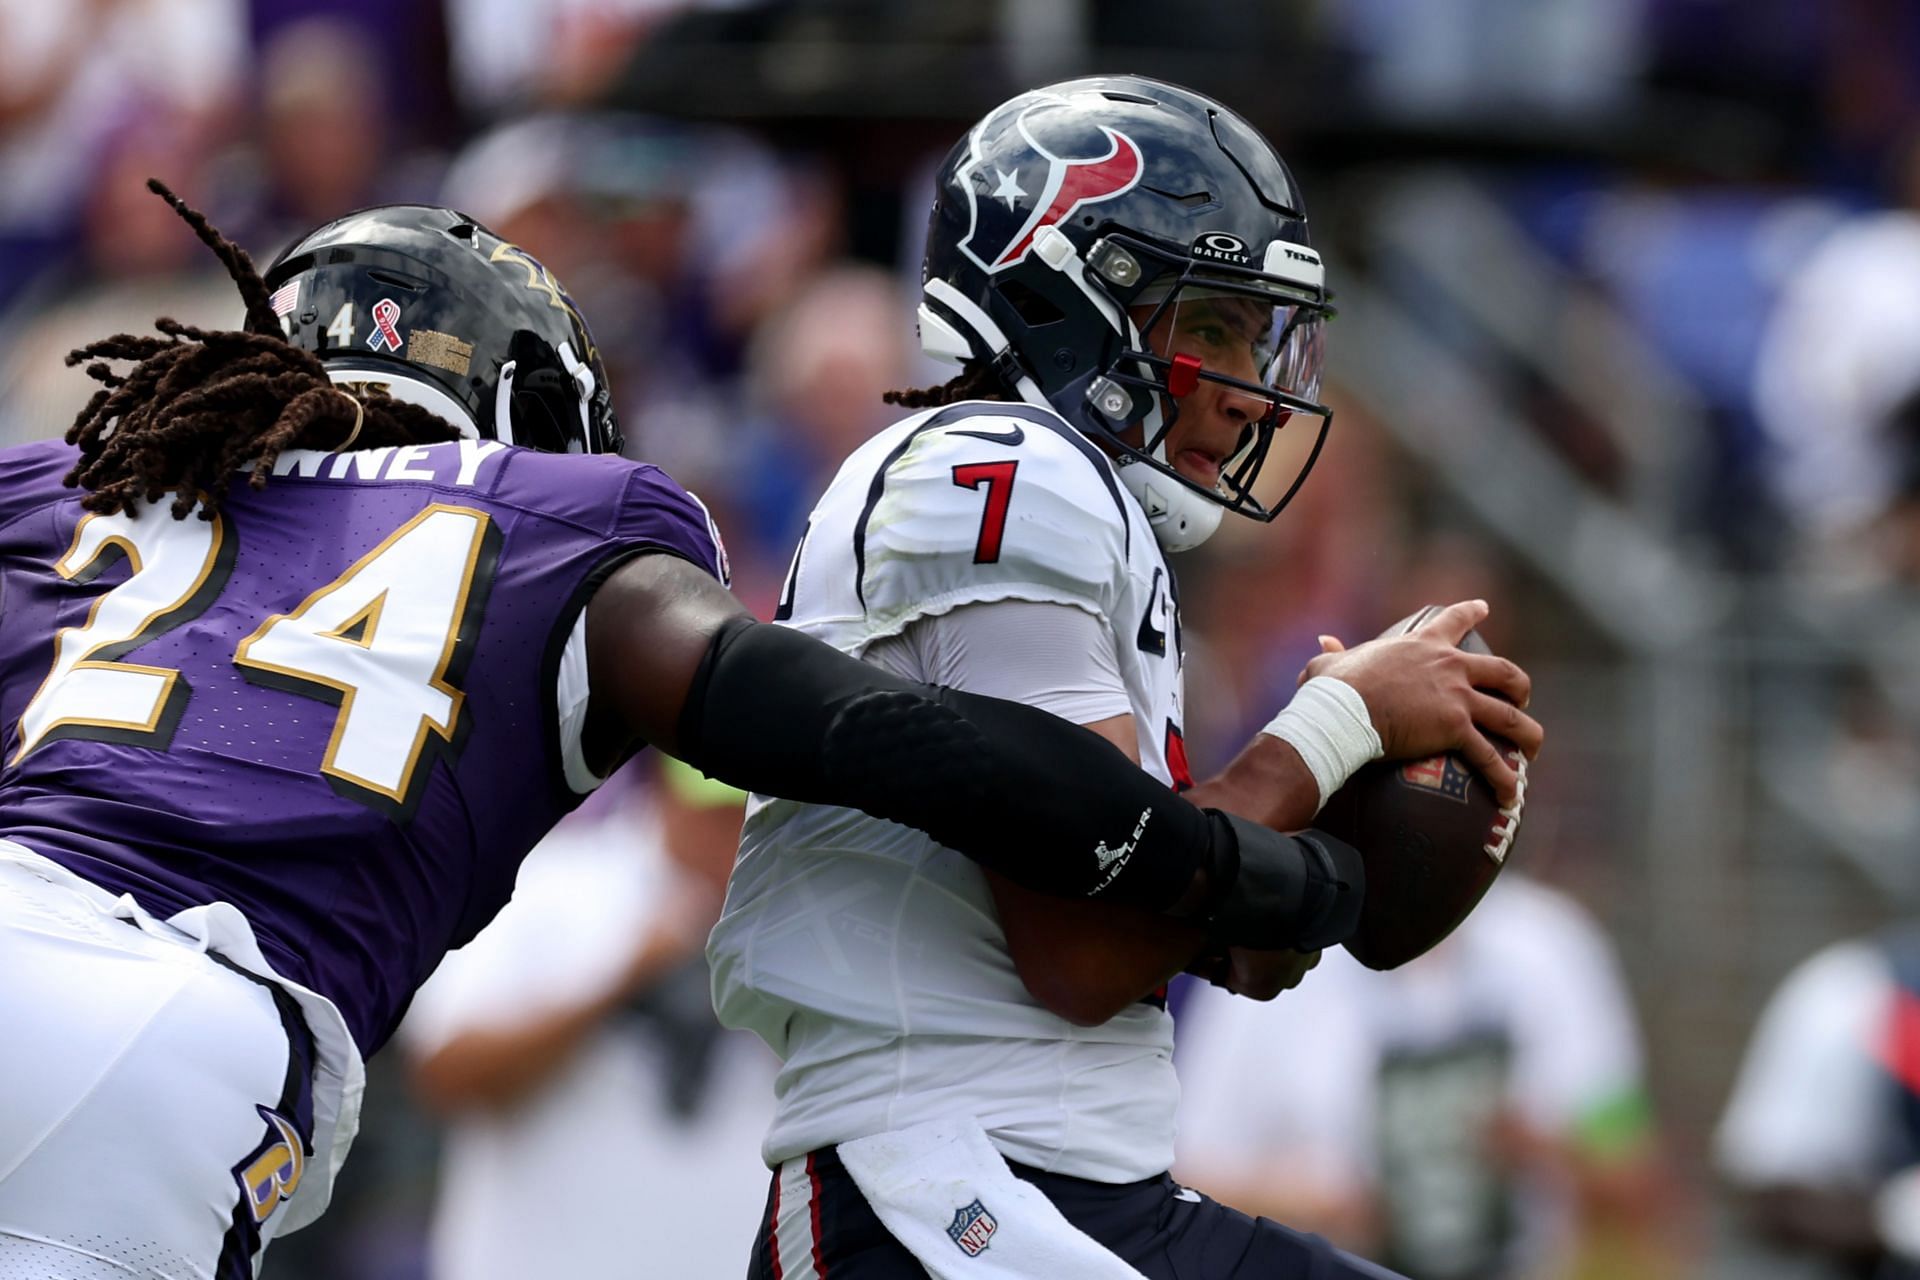 C.J. Stroud injury status: Texans QB officially active for Week 2 vs. Colts  - DraftKings Network